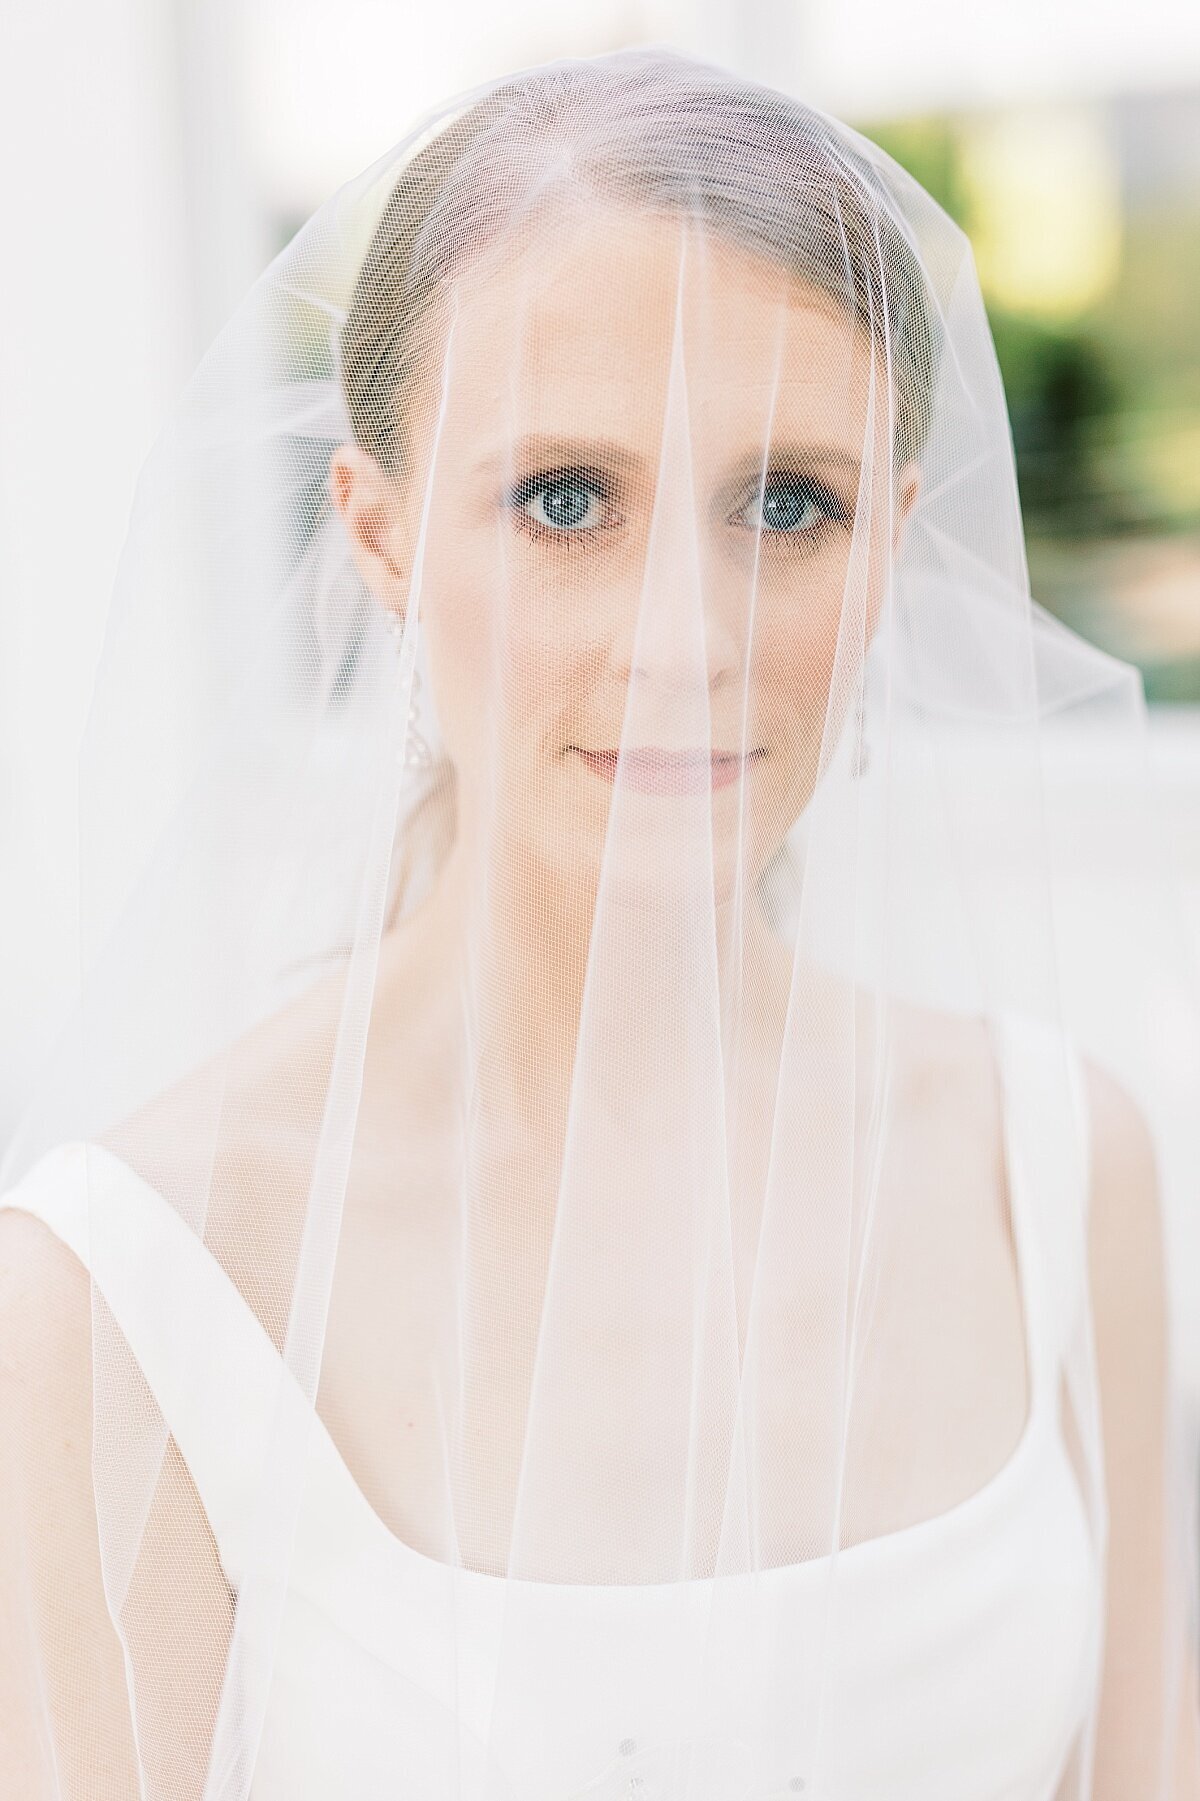 Linwood Estate bride with a veil over her face